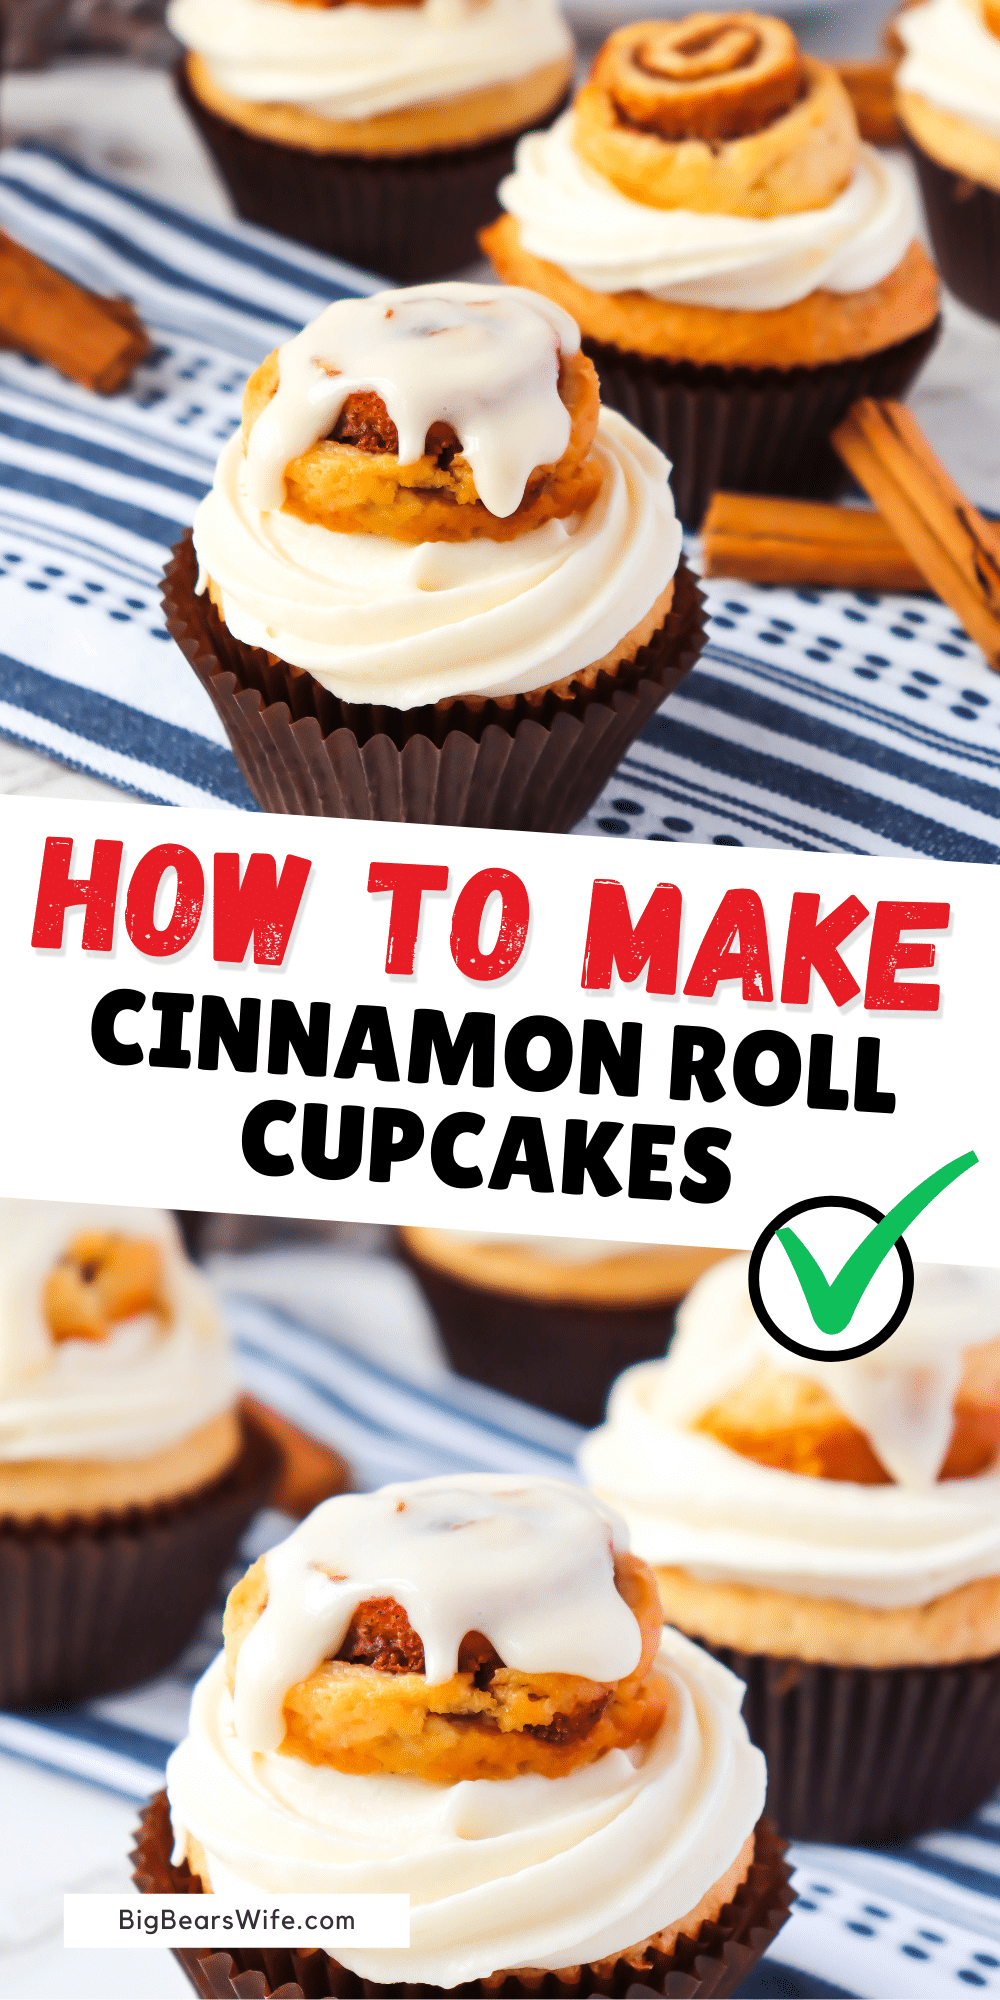 Cinnamon Roll Cupcakes are like a cinnamon roll topped with a cinnamon roll! Start with a white cupcake batter swirled with cinnamon and brown sugar, top it with homemade cinnamon cream cheese frosting, and finish off with a mini cinnamon roll.  via @bigbearswife